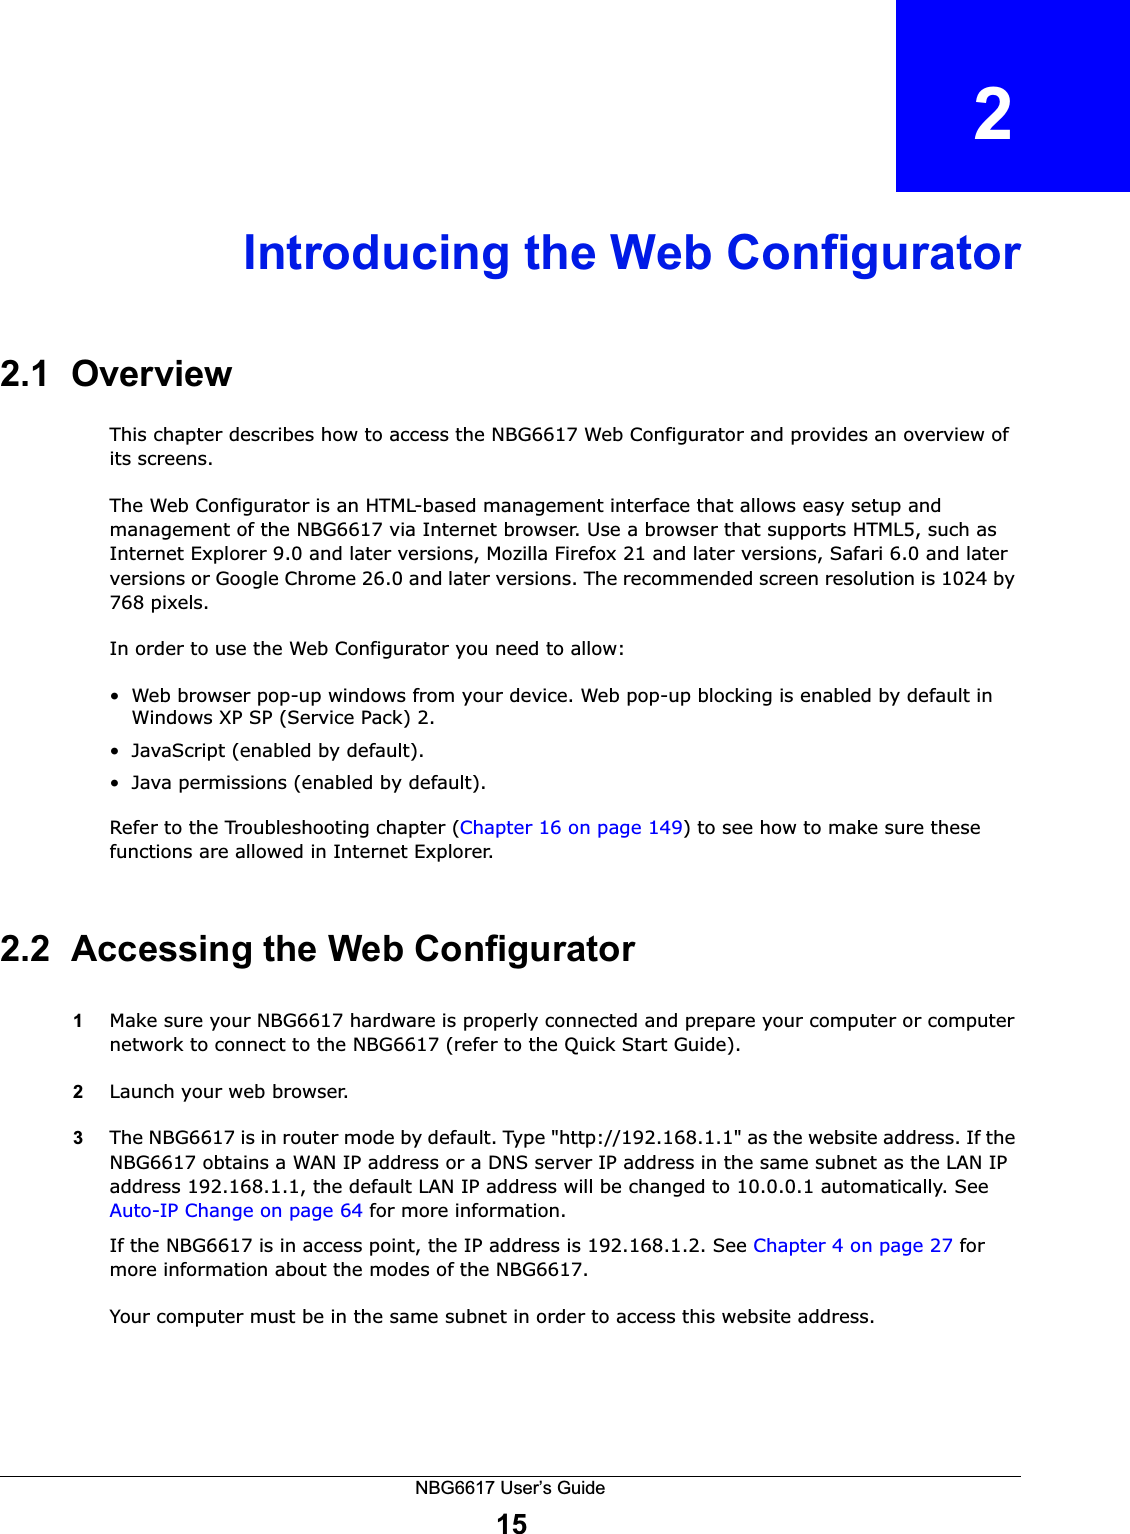 NBG6617 User’s Guide15CHAPTER   2Introducing the Web Configurator2.1  OverviewThis chapter describes how to access the NBG6617 Web Configurator and provides an overview of its screens.The Web Configurator is an HTML-based management interface that allows easy setup and management of the NBG6617 via Internet browser. Use a browser that supports HTML5, such as Internet Explorer 9.0 and later versions, Mozilla Firefox 21 and later versions, Safari 6.0 and later versions or Google Chrome 26.0 and later versions. The recommended screen resolution is 1024 by 768 pixels.In order to use the Web Configurator you need to allow:• Web browser pop-up windows from your device. Web pop-up blocking is enabled by default in Windows XP SP (Service Pack) 2.• JavaScript (enabled by default).• Java permissions (enabled by default).Refer to the Troubleshooting chapter (Chapter 16 on page 149) to see how to make sure these functions are allowed in Internet Explorer.2.2  Accessing the Web Configurator1Make sure your NBG6617 hardware is properly connected and prepare your computer or computer network to connect to the NBG6617 (refer to the Quick Start Guide).2Launch your web browser.3The NBG6617 is in router mode by default. Type &quot;http://192.168.1.1&quot; as the website address. If the NBG6617 obtains a WAN IP address or a DNS server IP address in the same subnet as the LAN IP address 192.168.1.1, the default LAN IP address will be changed to 10.0.0.1 automatically. See Auto-IP Change on page 64 for more information.If the NBG6617 is in access point, the IP address is 192.168.1.2. See Chapter 4 on page 27 for more information about the modes of the NBG6617.Your computer must be in the same subnet in order to access this website address.